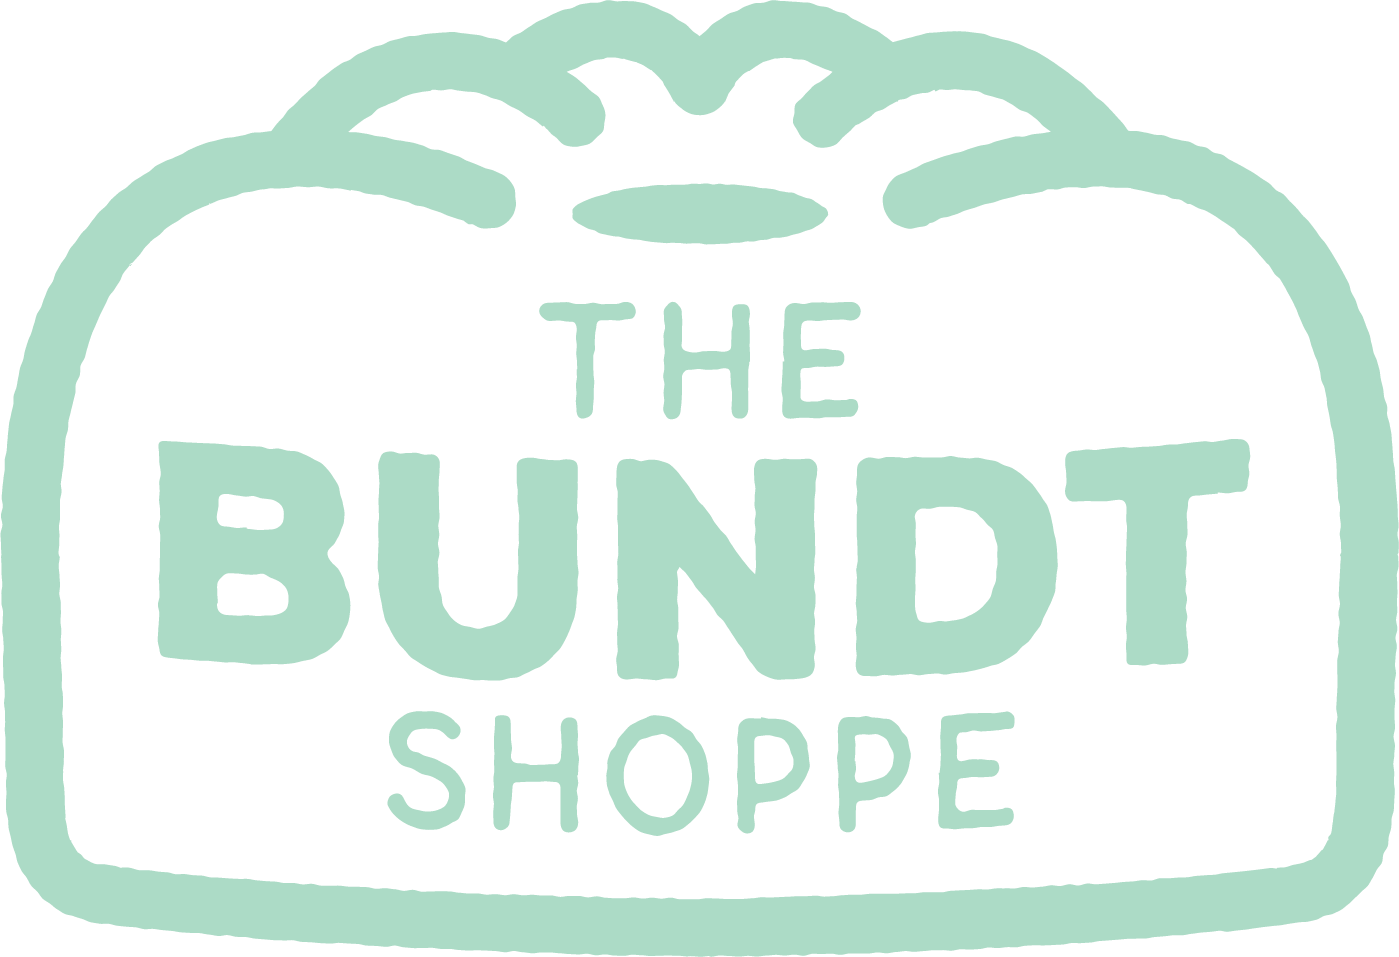 The Bundt Shoppe | Delicious Bundt Cakes for Every Occasion